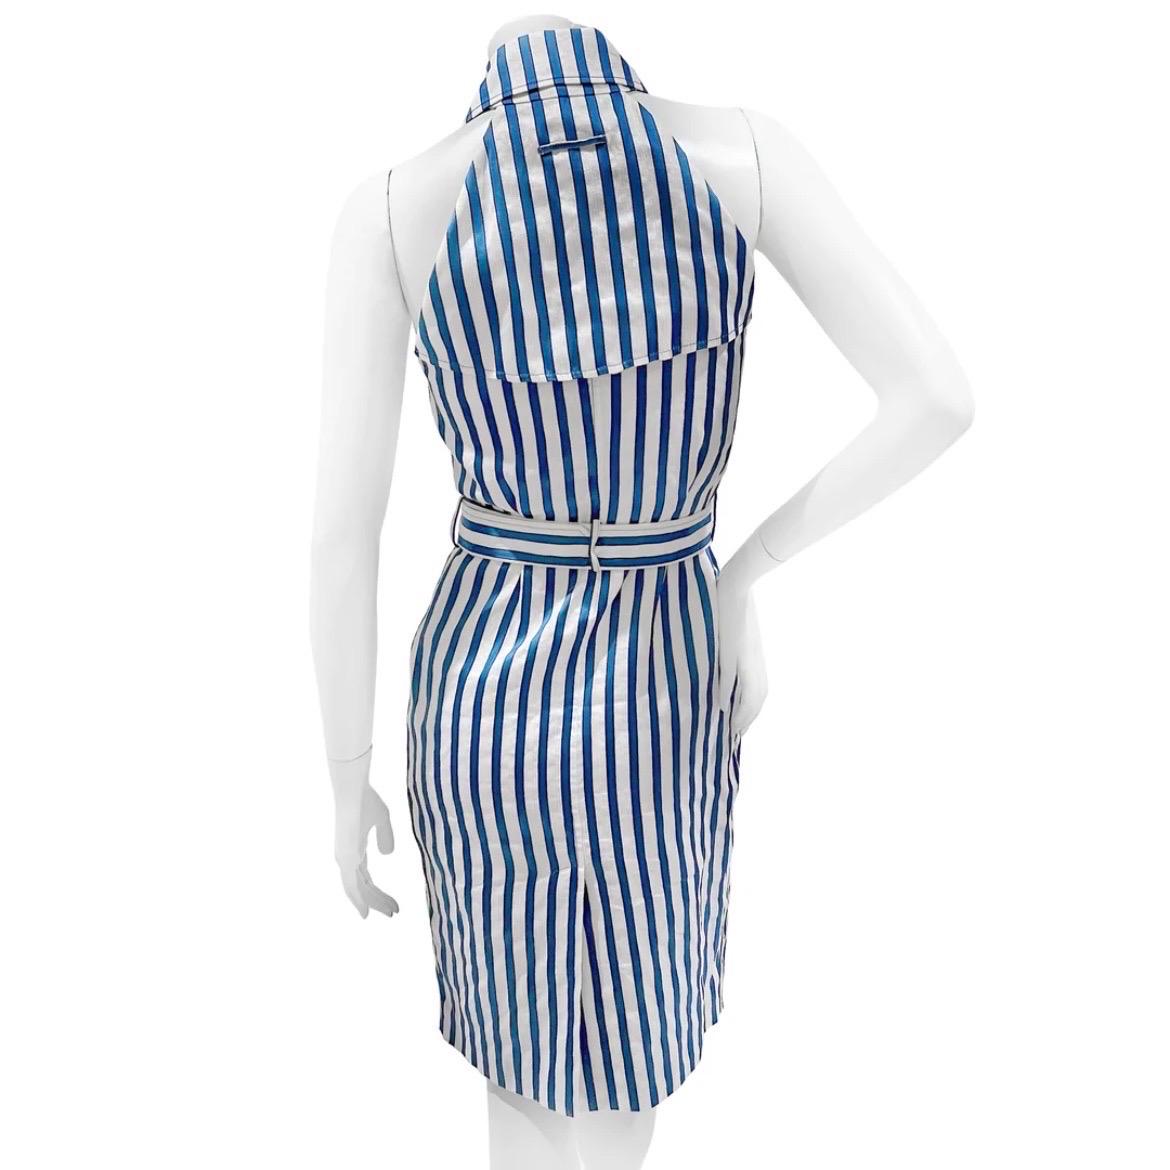 Vintage Stripe Sleeveless Dress by Jean Paul Gaultier Femme
Circa 1990s
Blue and white vertical stripe
Sleeveless
Front of dress has single snap button and multi inside button closure
Top collar detail with clasp closure
Dress has adjustable belt